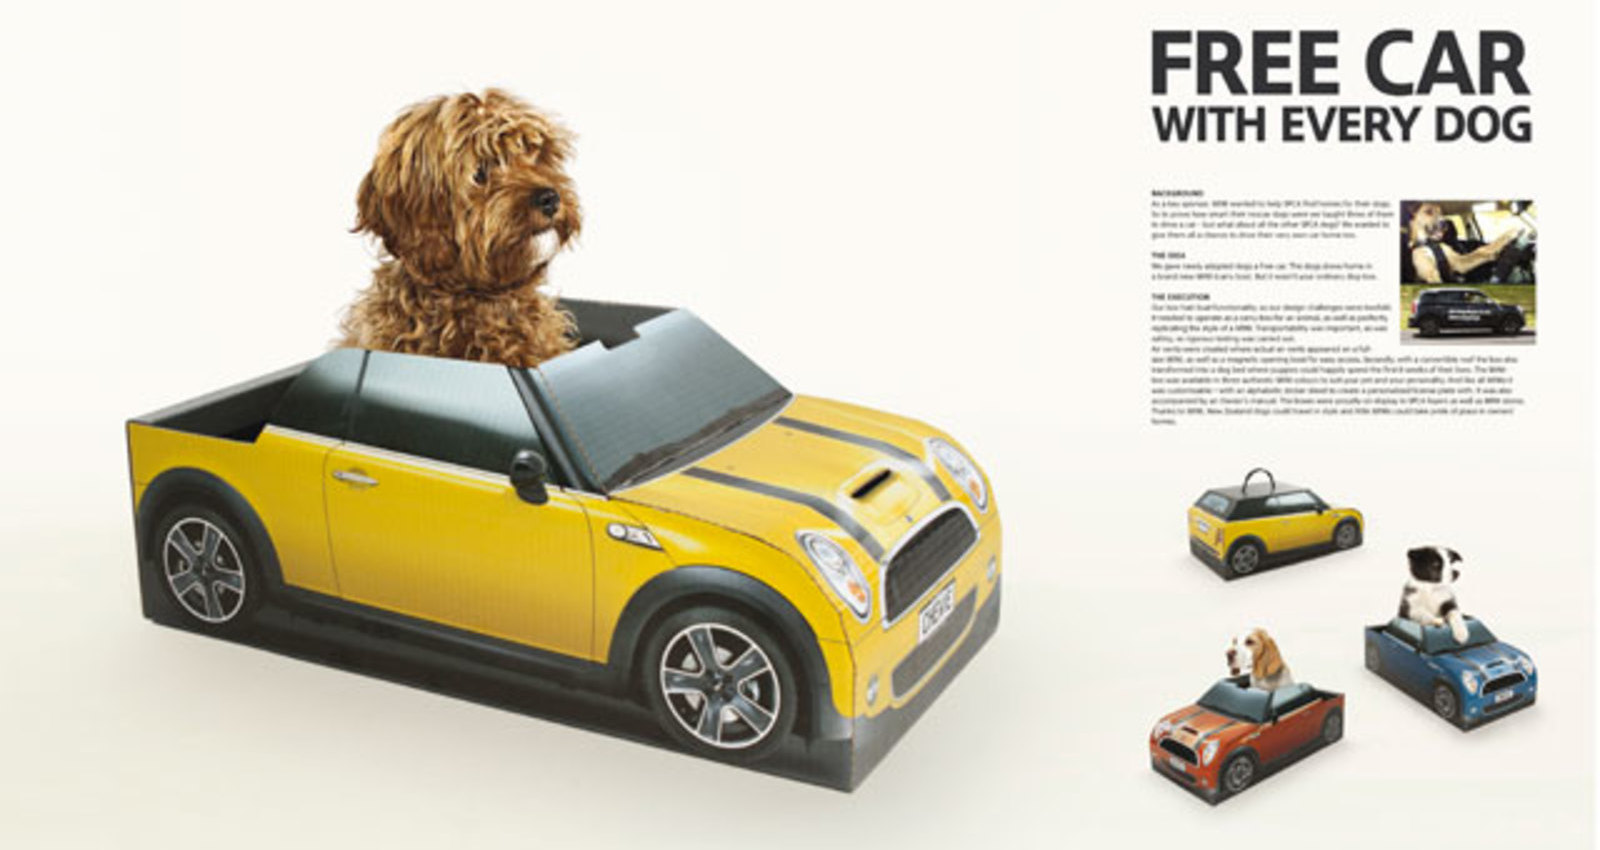 Free car with every dog.